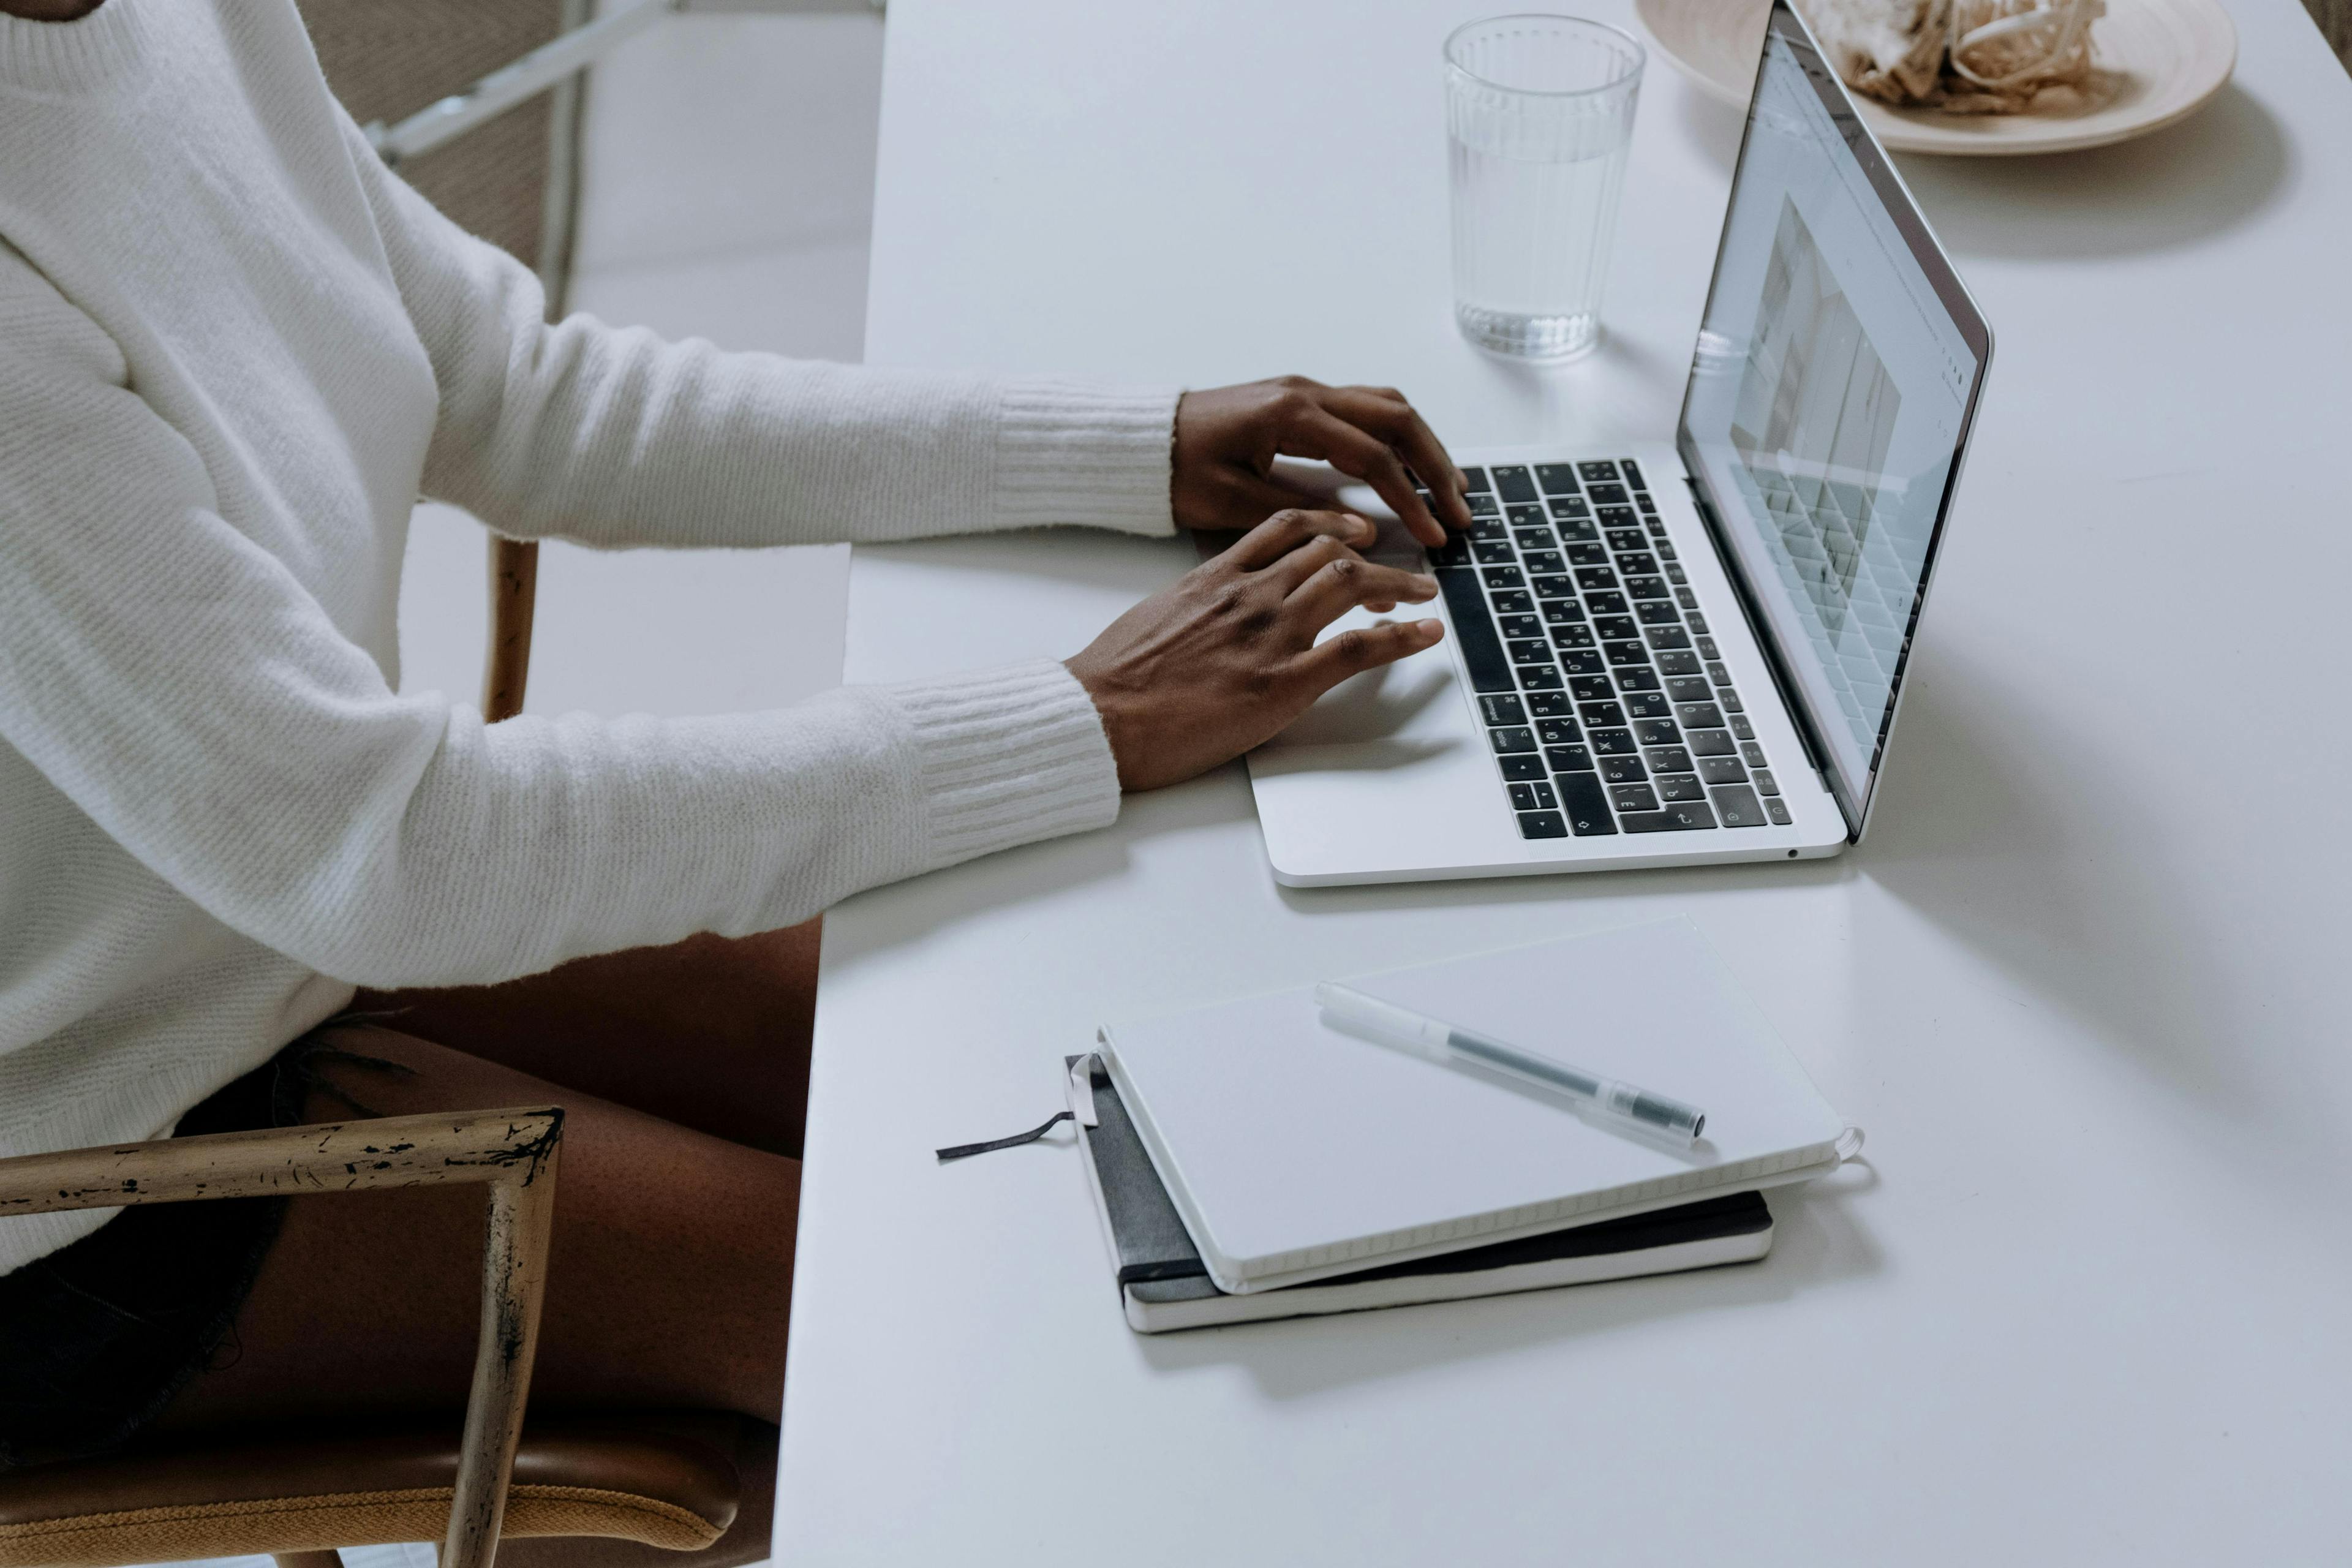 A person wearing a white sweater is typing on a laptop at a white desk. On the desk are a notebook, a pen, and a glass of water. The setting is minimalistic and clean. This image could represent a situation where the landing page experience is below average.